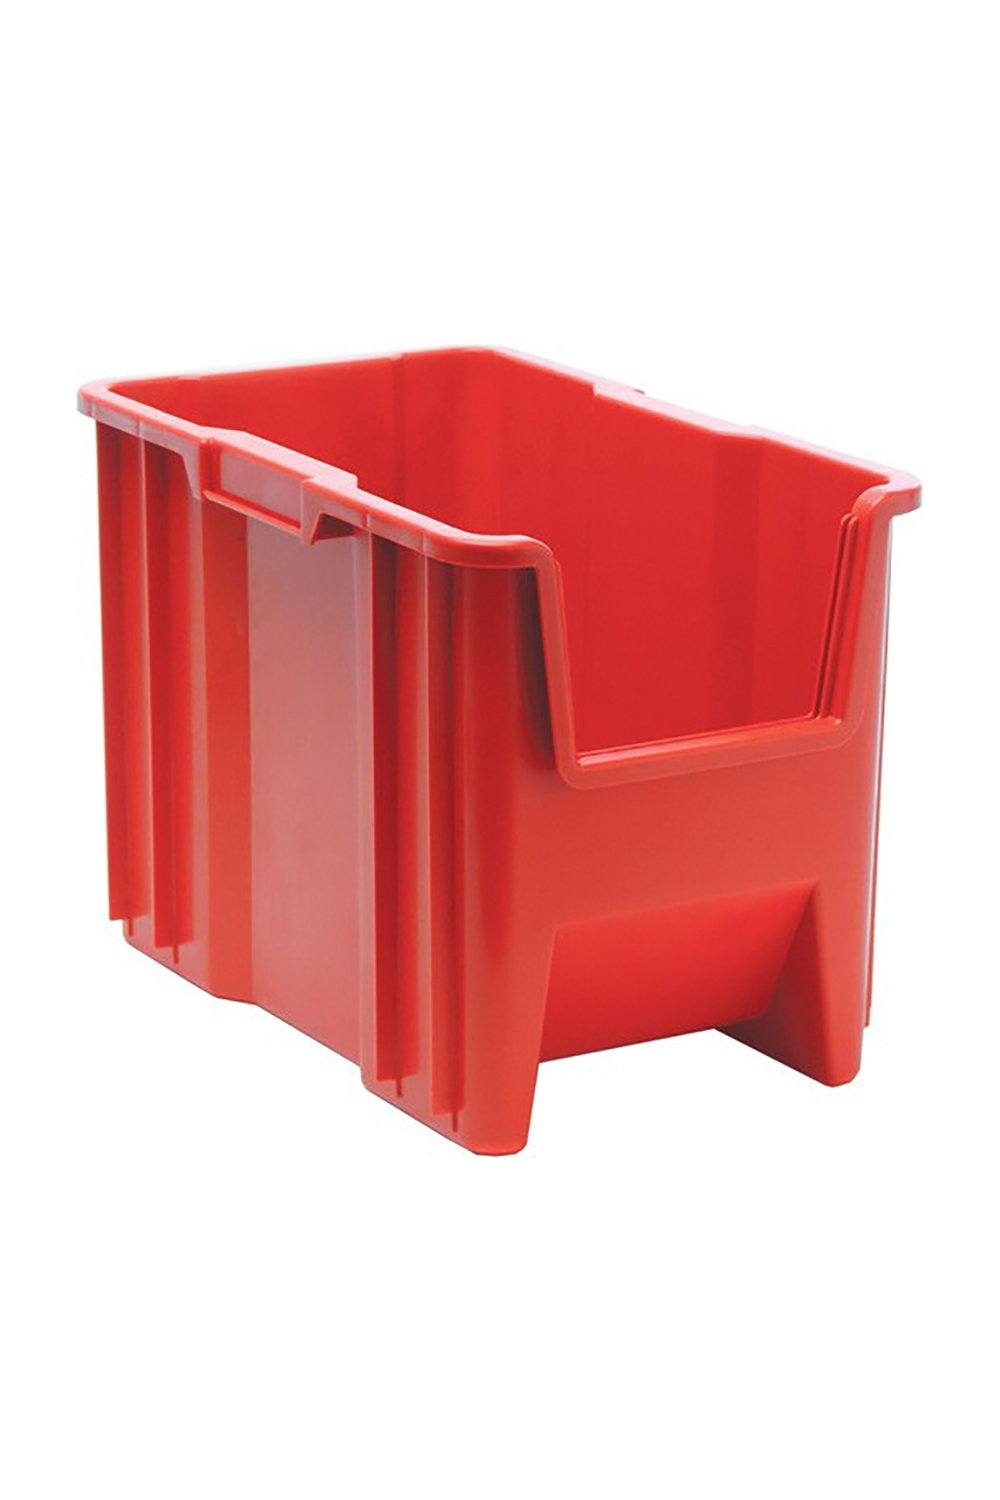 Giant Stack Container Bins & Containers Acart 17-1/2"L x 10-7/8"W x 12-1/2"H Red 